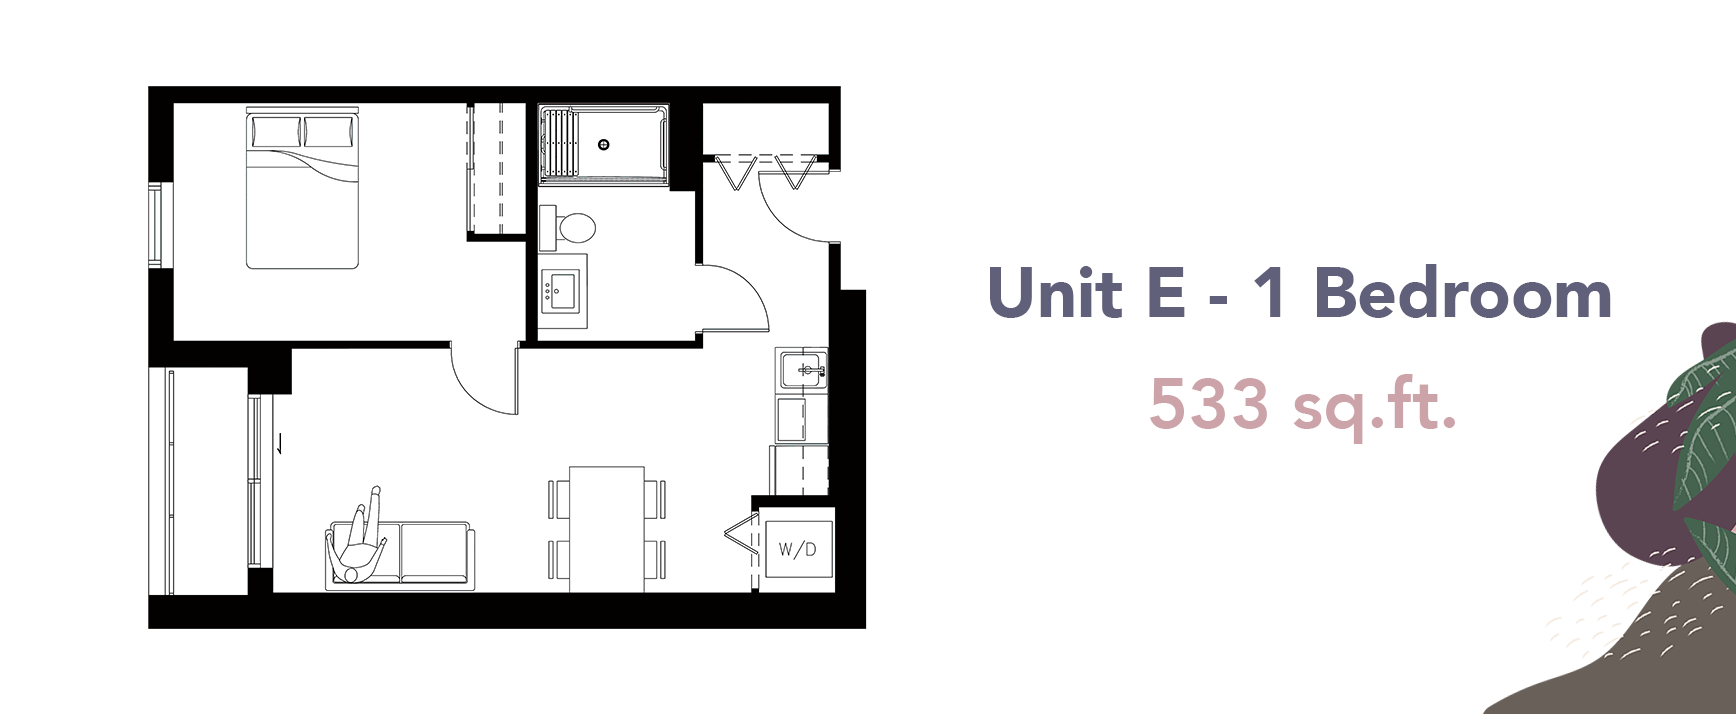 The floor plan of a Wisteria Place one bedroom suite